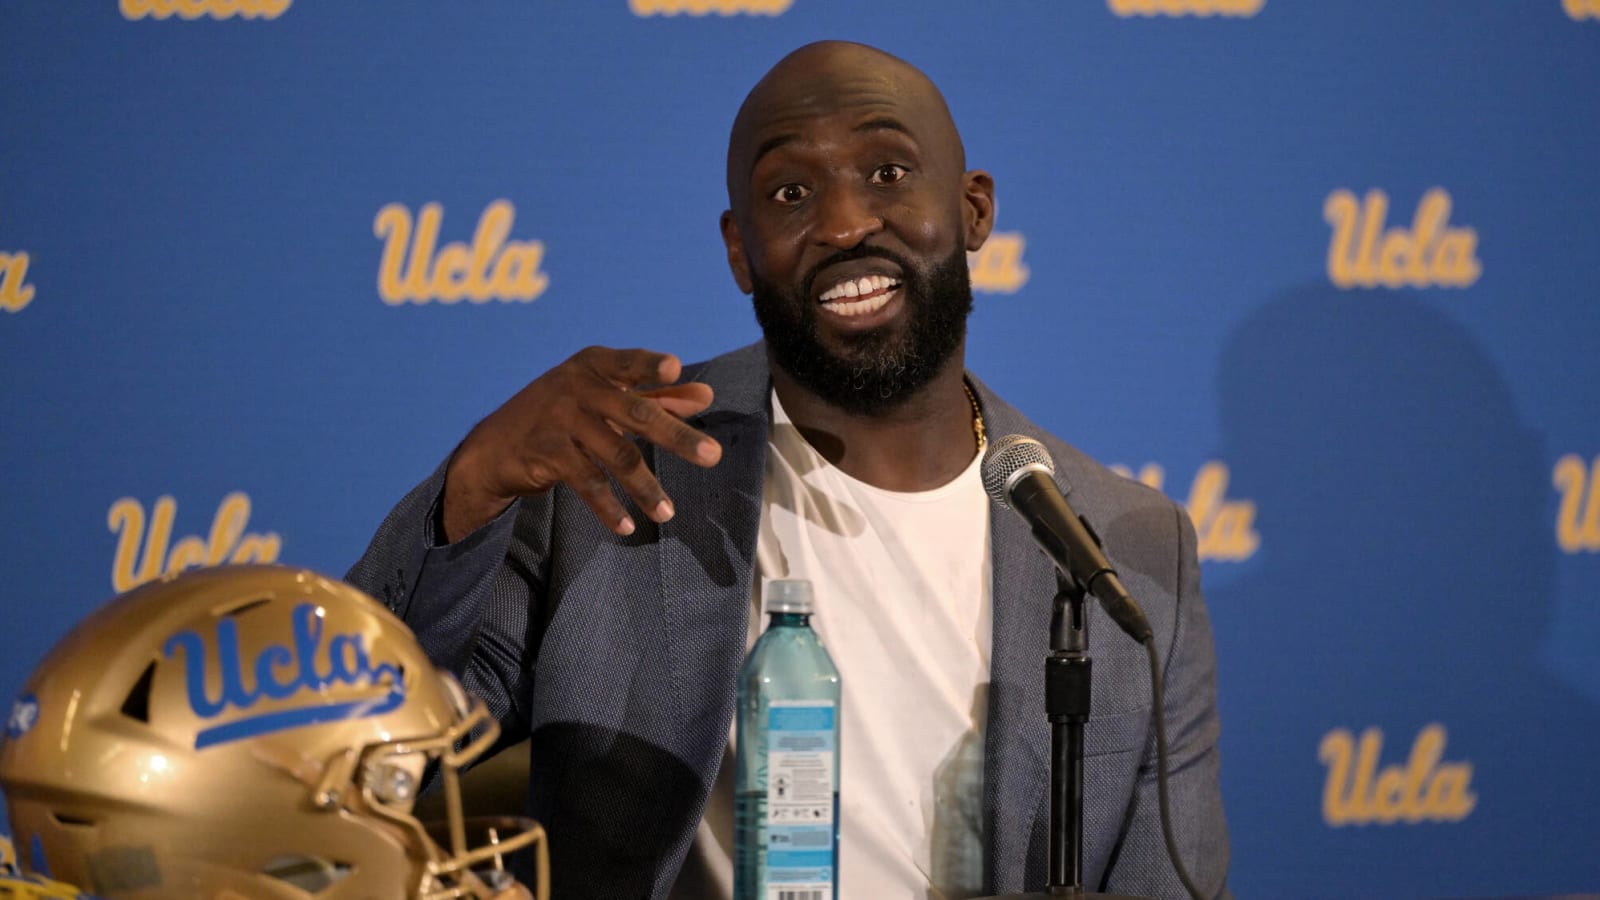 UCLA Football: DeShaun Foster On Offensive Coordinator Hire: 'I Wanted a Real Presence, Demand The Kind Of Discipline I Want'